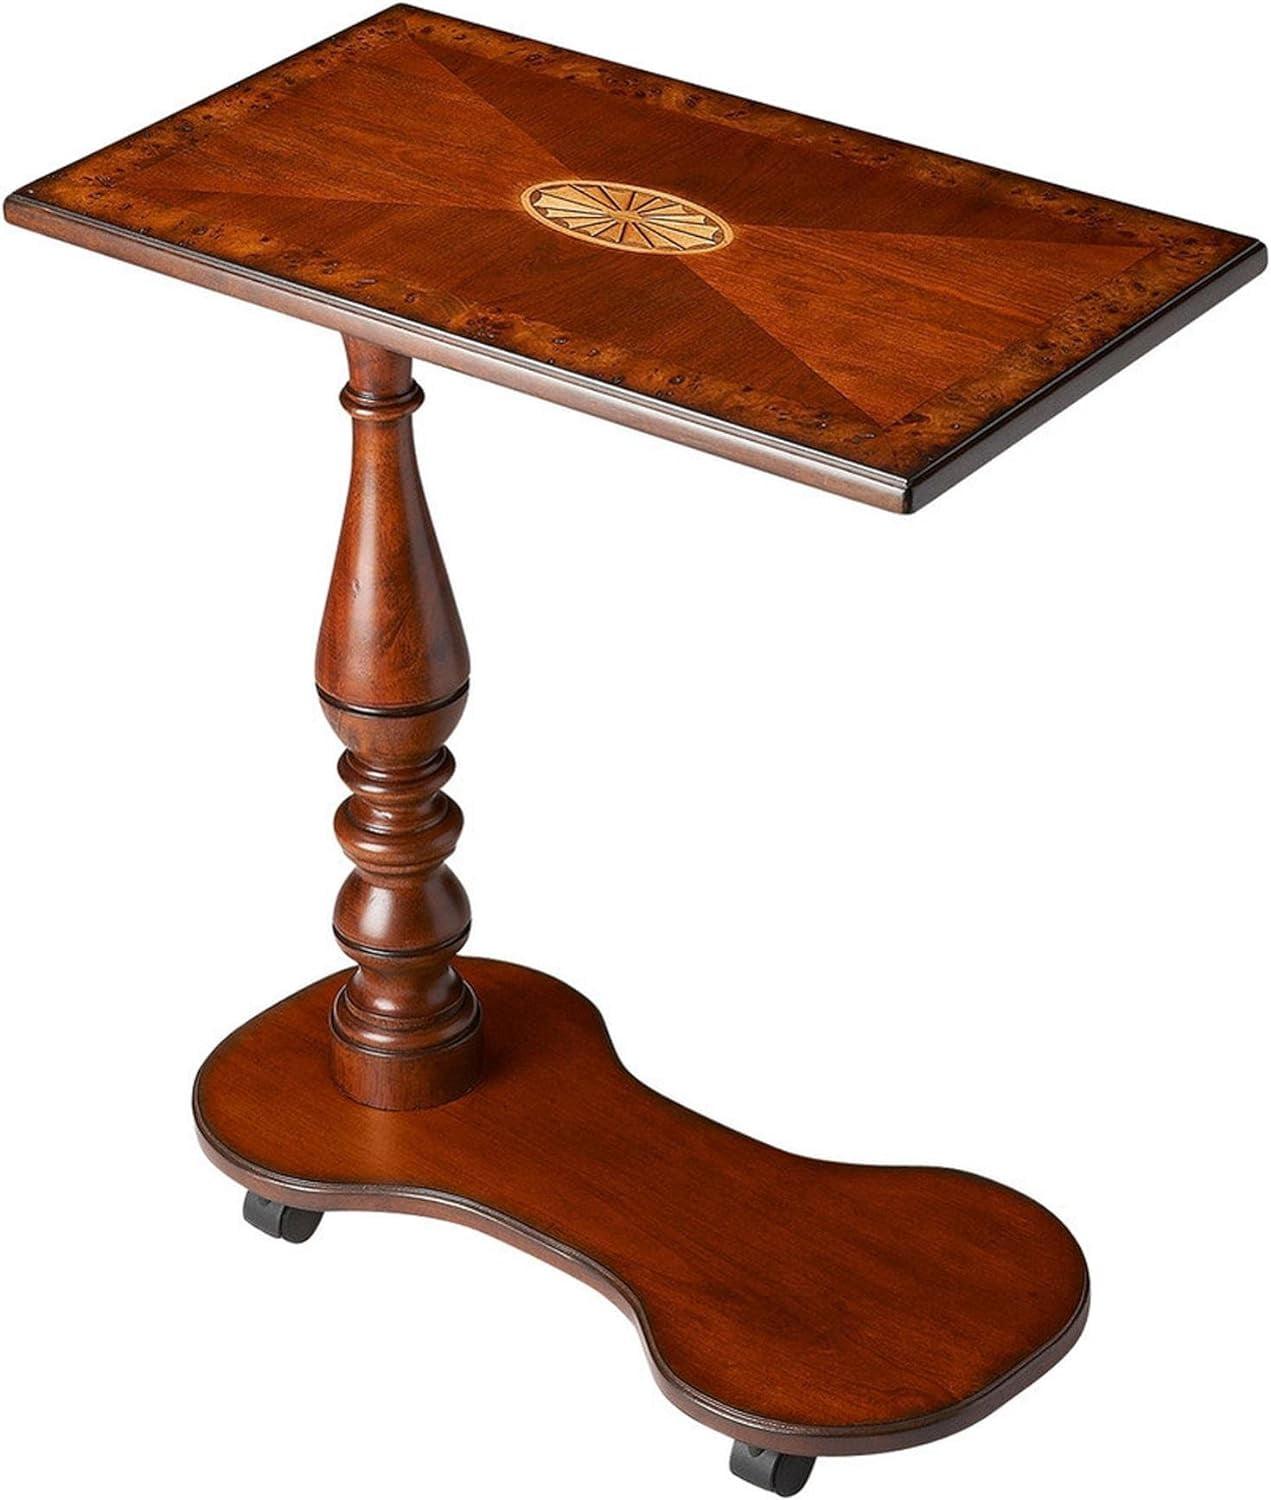 Medium Brown Rectangular Wood Tray Table with Casters